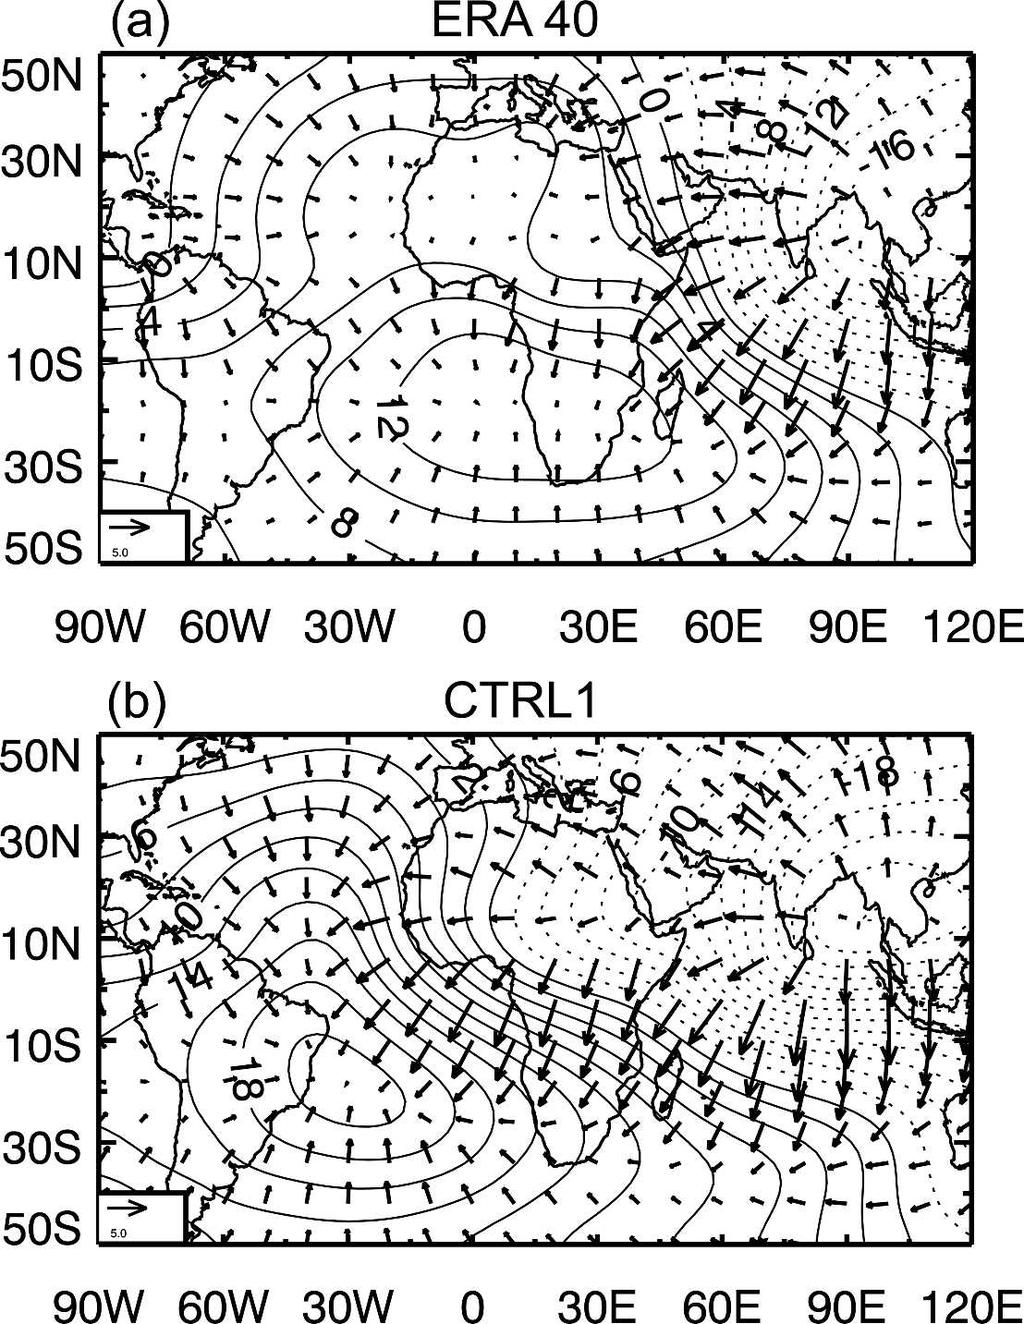 218 J O U R N A L O F C L I M A T E VOLUME 21 FIG. 2. Upper-level (200 hpa) divergent wind (vectors) and velocity potential (contours, m 2 s 1 10 6 ) in July for (a) ERA-40 and (b) CTRL1.